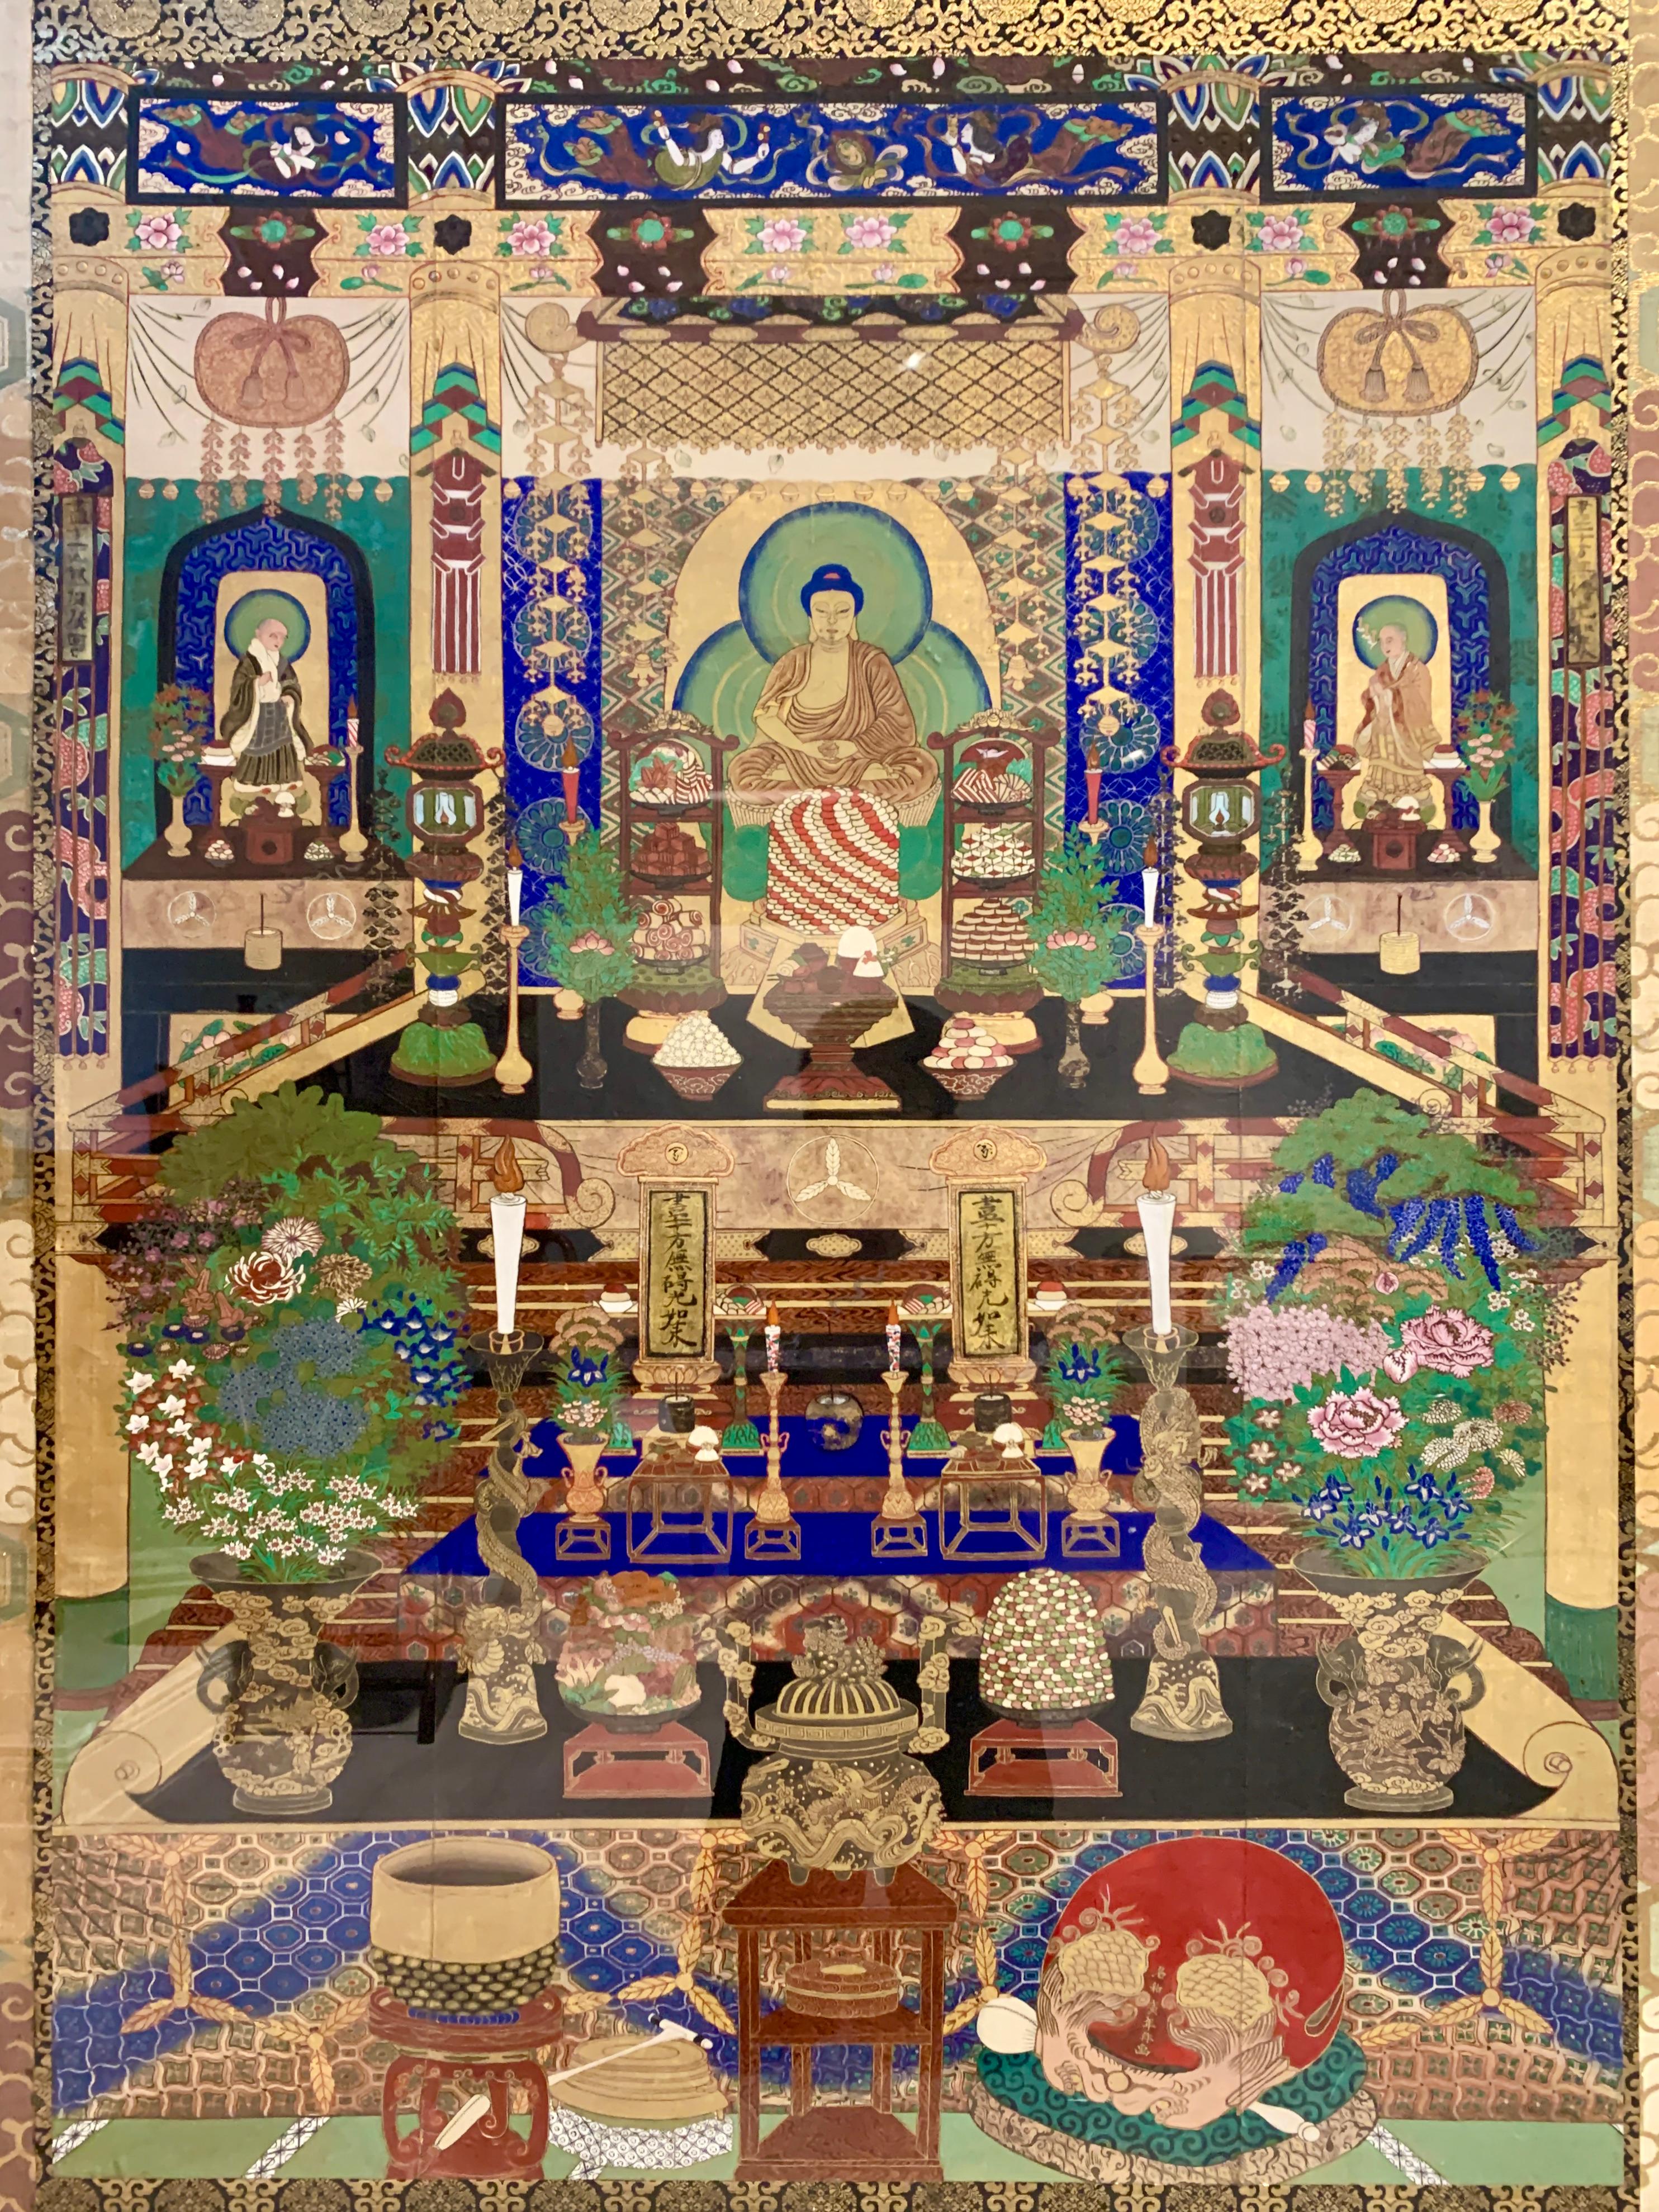 A large and incredible Japanese painting of a Buddhist temple hall with Amida Nyorai, late Edo or early Meiji period, mid-19th century, Japan. Mounted with silk brocade and framed in a heavy, carved and gilt frame.

The painting depicts an opulent